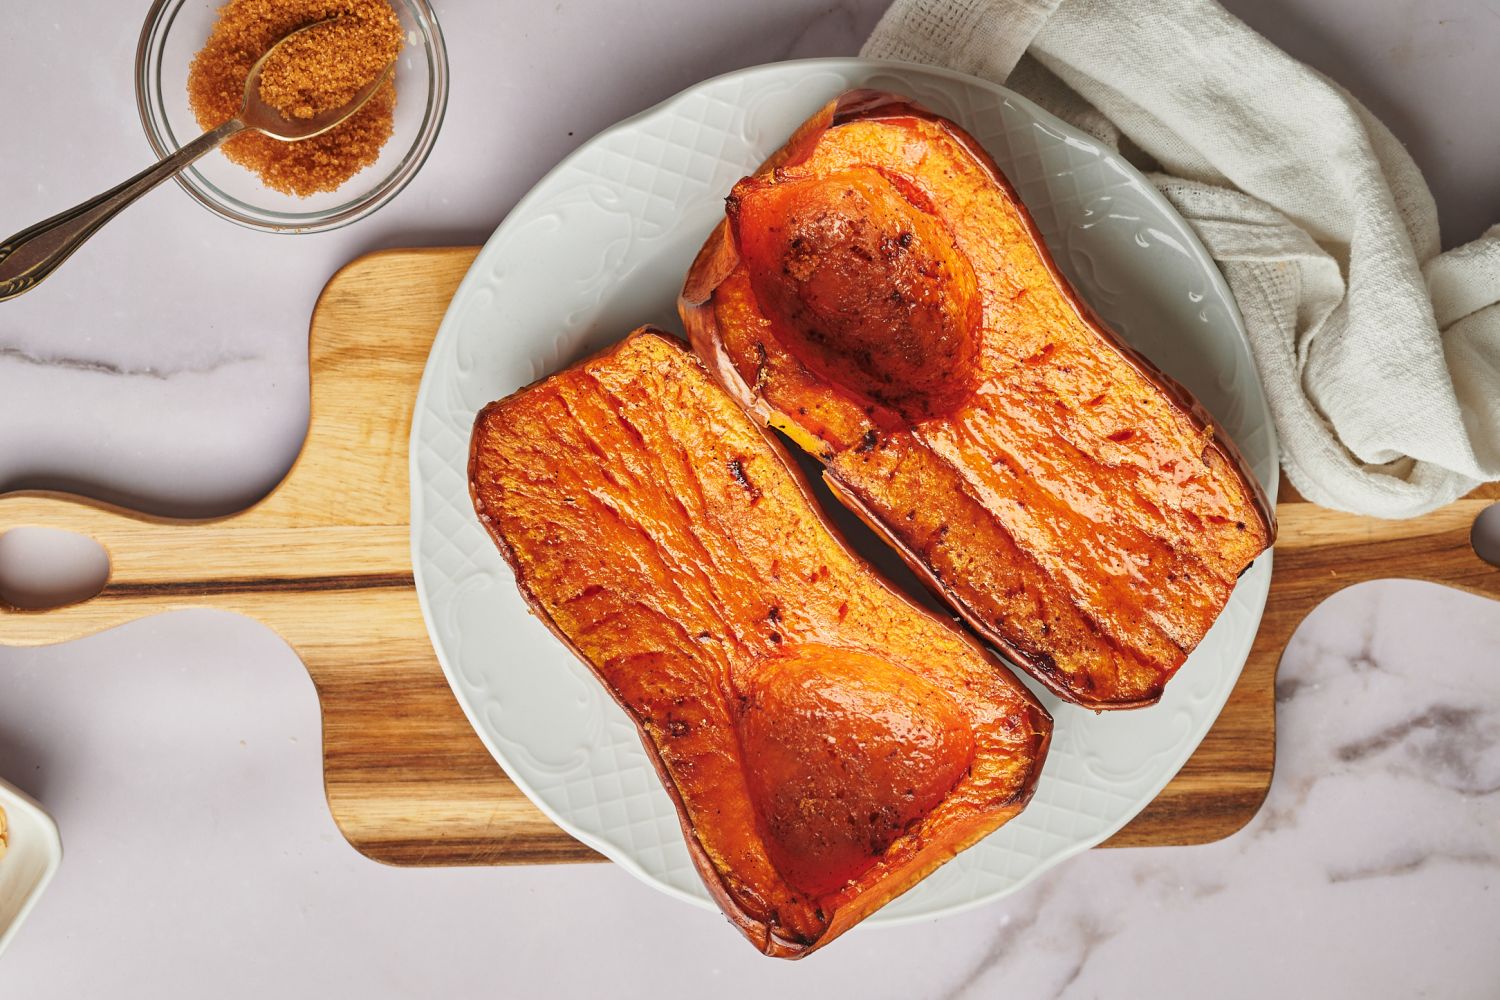 Whole roasted butternut squash hlaves served on a plate with olive oil, salt, pepper, and brown sugar.